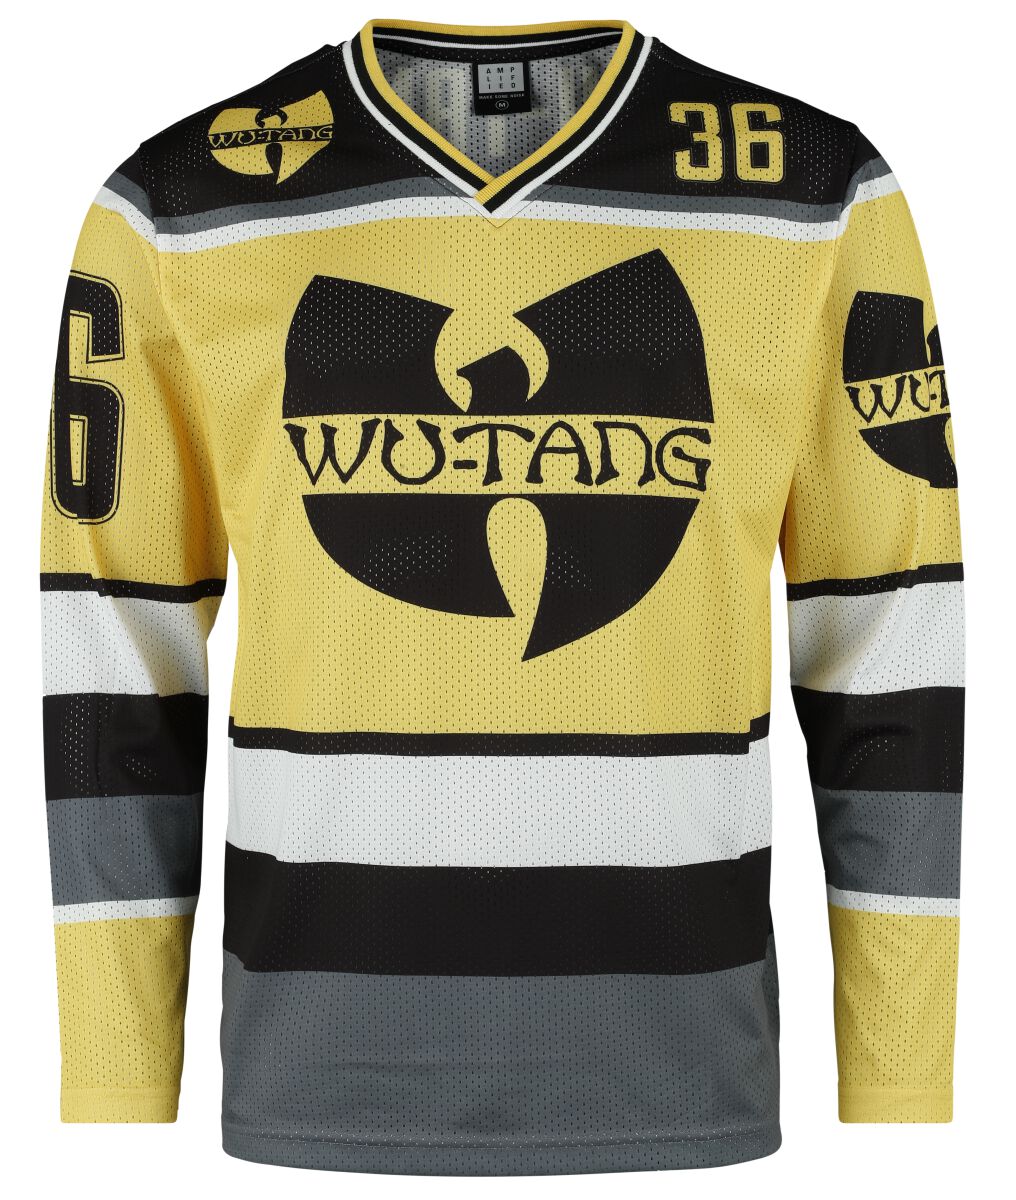 Wu-Tang Clan Amplified Collection - Logo Trikot multicolor in L